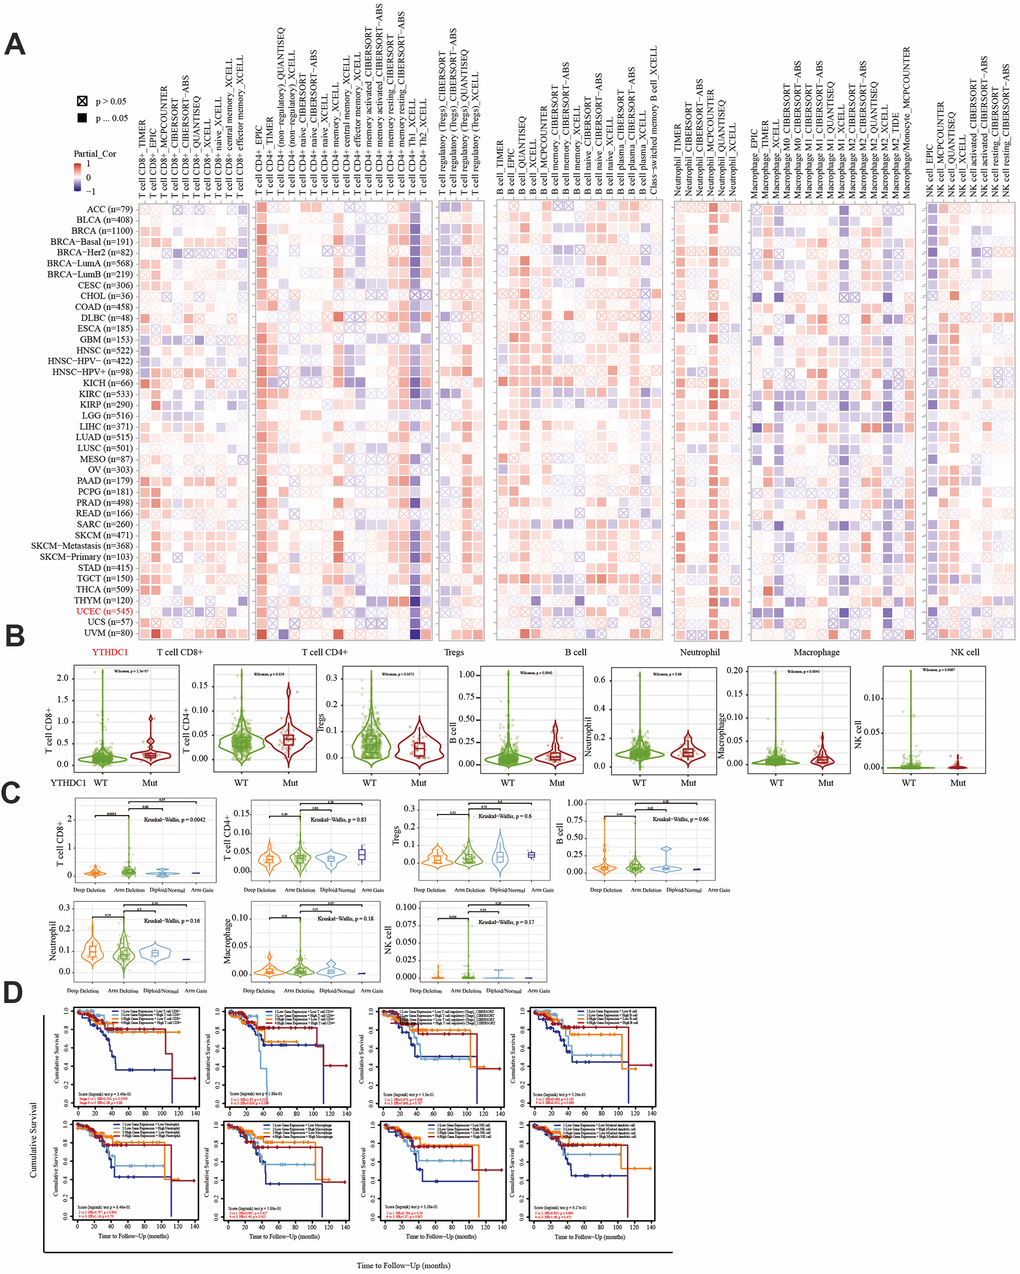 Correlation between the immune infiltration level and the expression, mutation, SCNA status, and outcome module of YTHDC1. (A) Heatmap depicting the correlation of YTHDC1 expression with the immune infiltration level in diverse cancer types. (B) Violin plots depicting the effect of YTHDC1 gene mutations on immune cell infiltration and immune cell types in endometrial cancer. (C) Violin plots depicting the effect of YTHDC1 SCNA status on immune cell infiltration and immune cell types in endometrial cancer. (D) Outcome module showing the clinical relevance of tumor immune subsets.